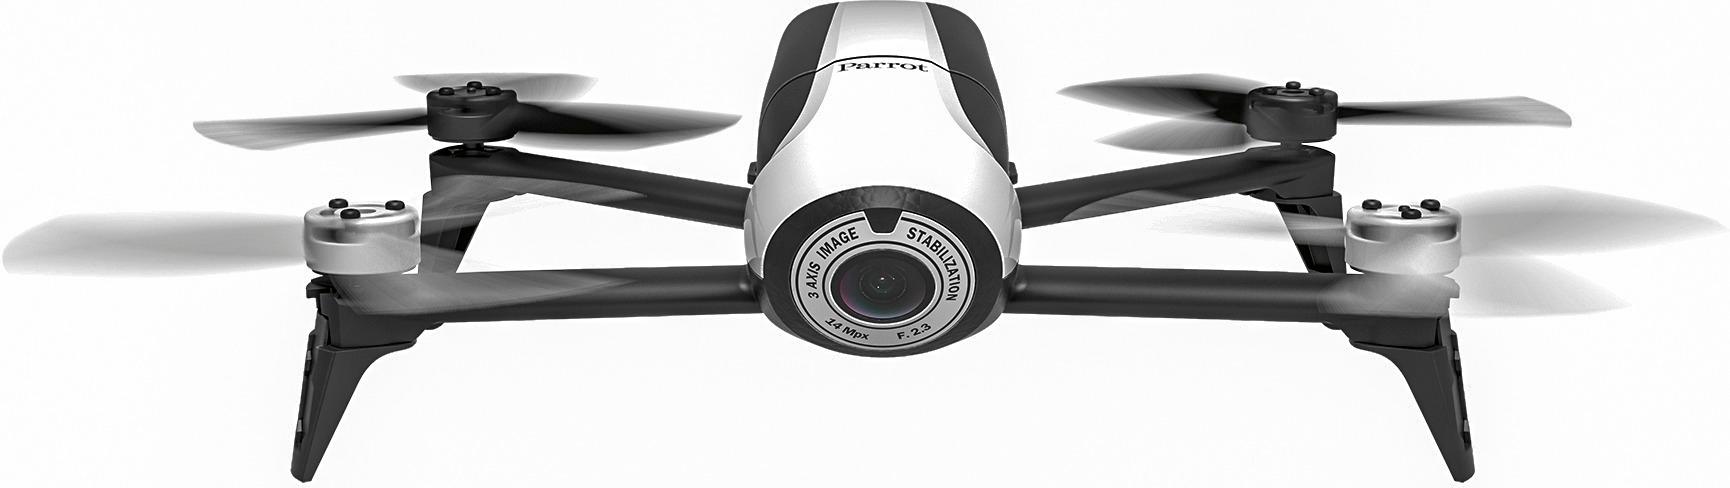 Best Buy: Parrot Bebop 2 Quadcopter with Skycontroller 2 and 